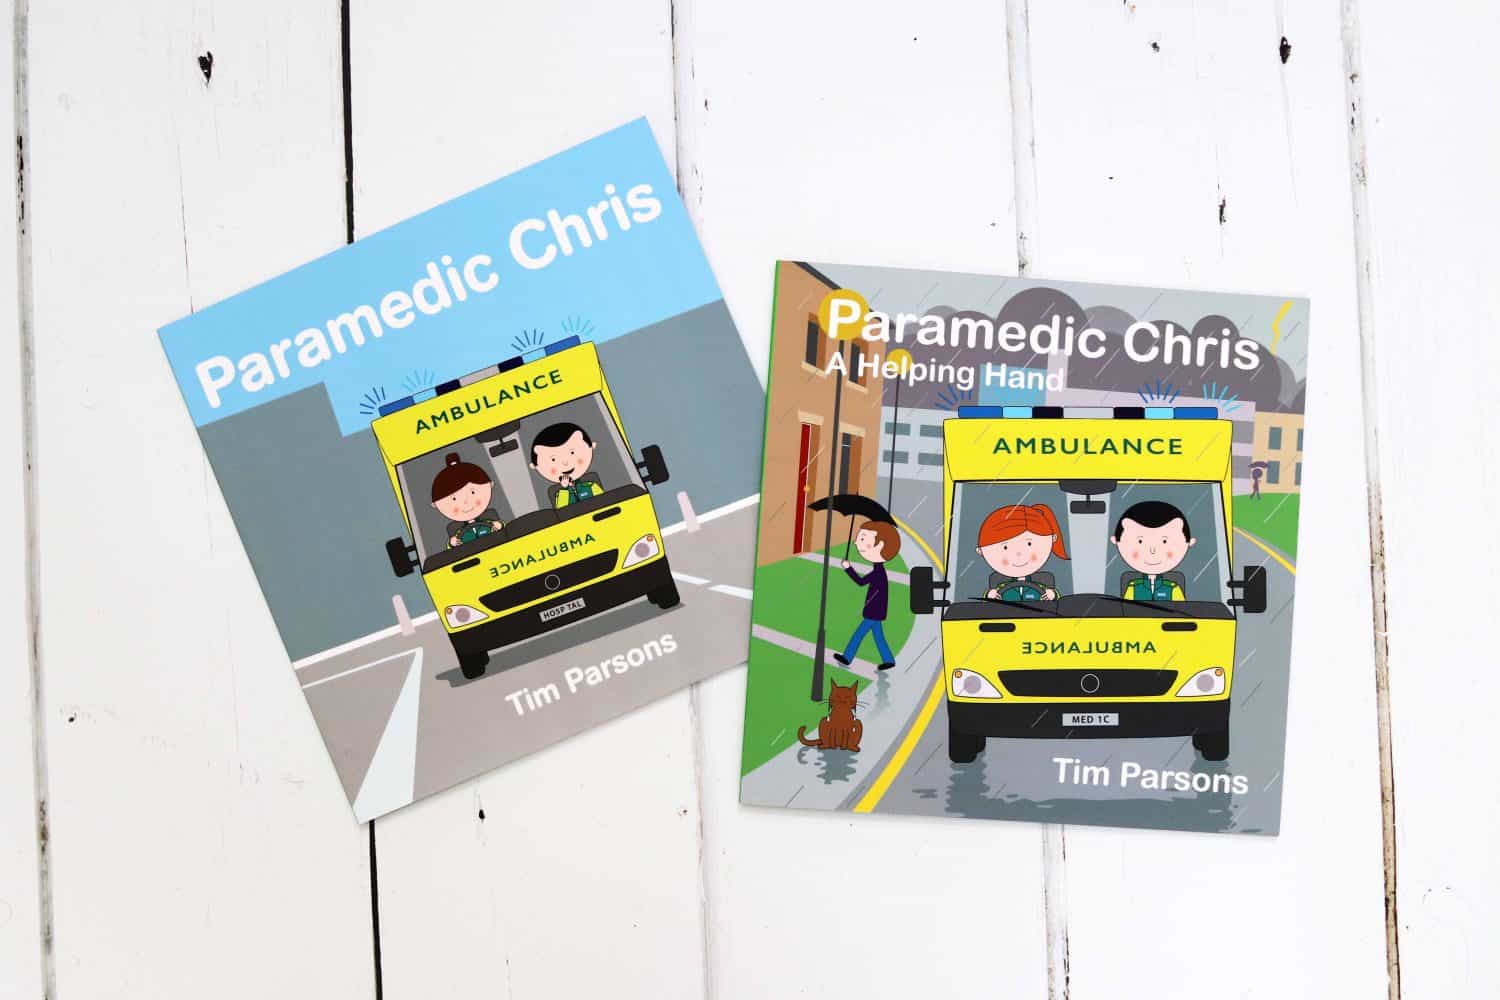 Teaching Children about Emergency Services with Paramedic Chris